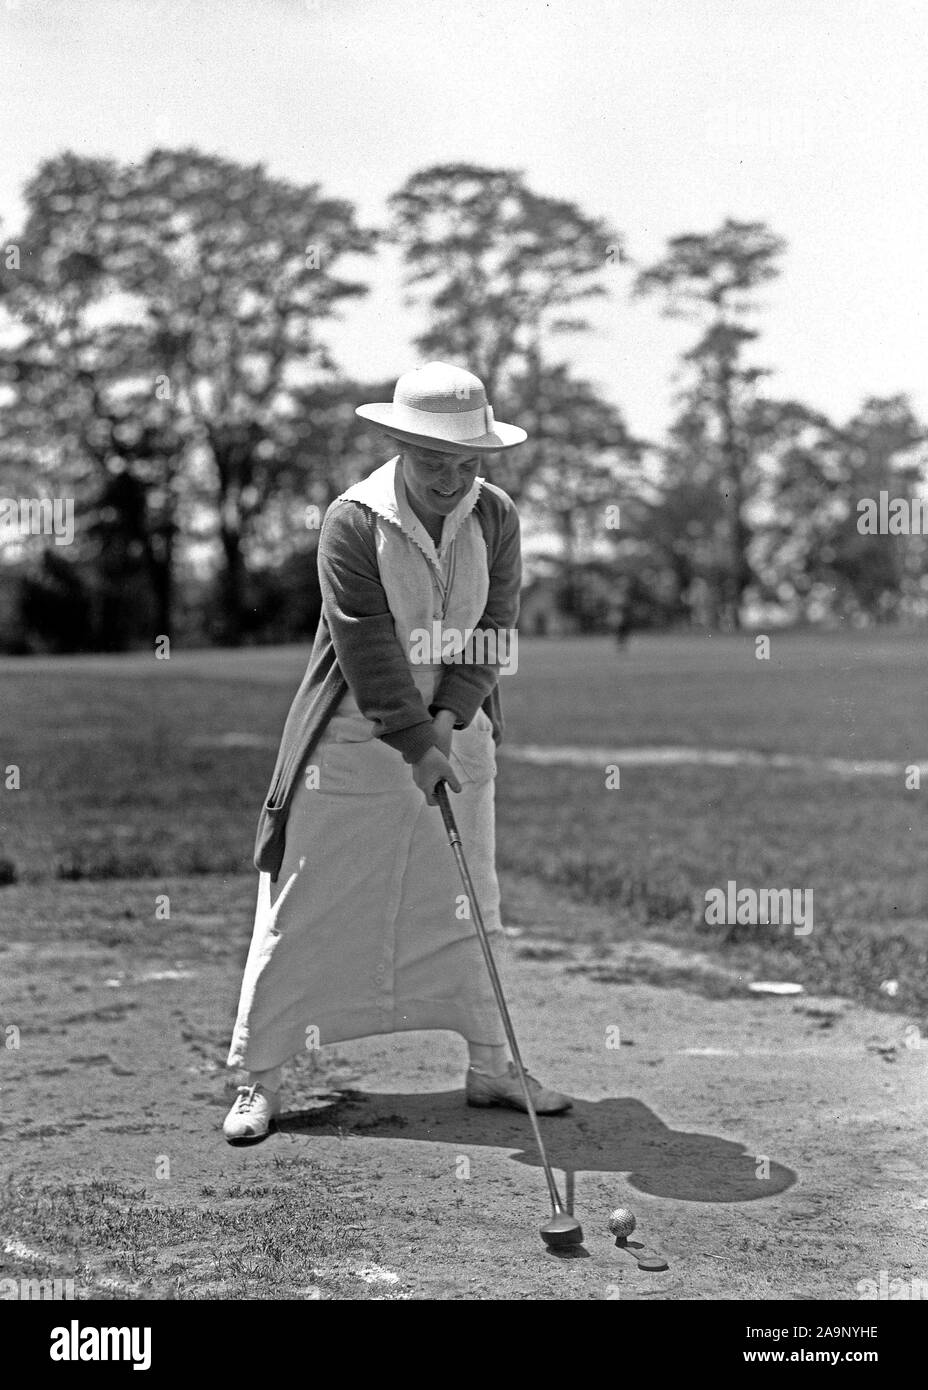 Early 1900s Photos - Woman hitting a golf ball out of a sand trap (woman playing golf) ca. 1913-1917 Stock Photo